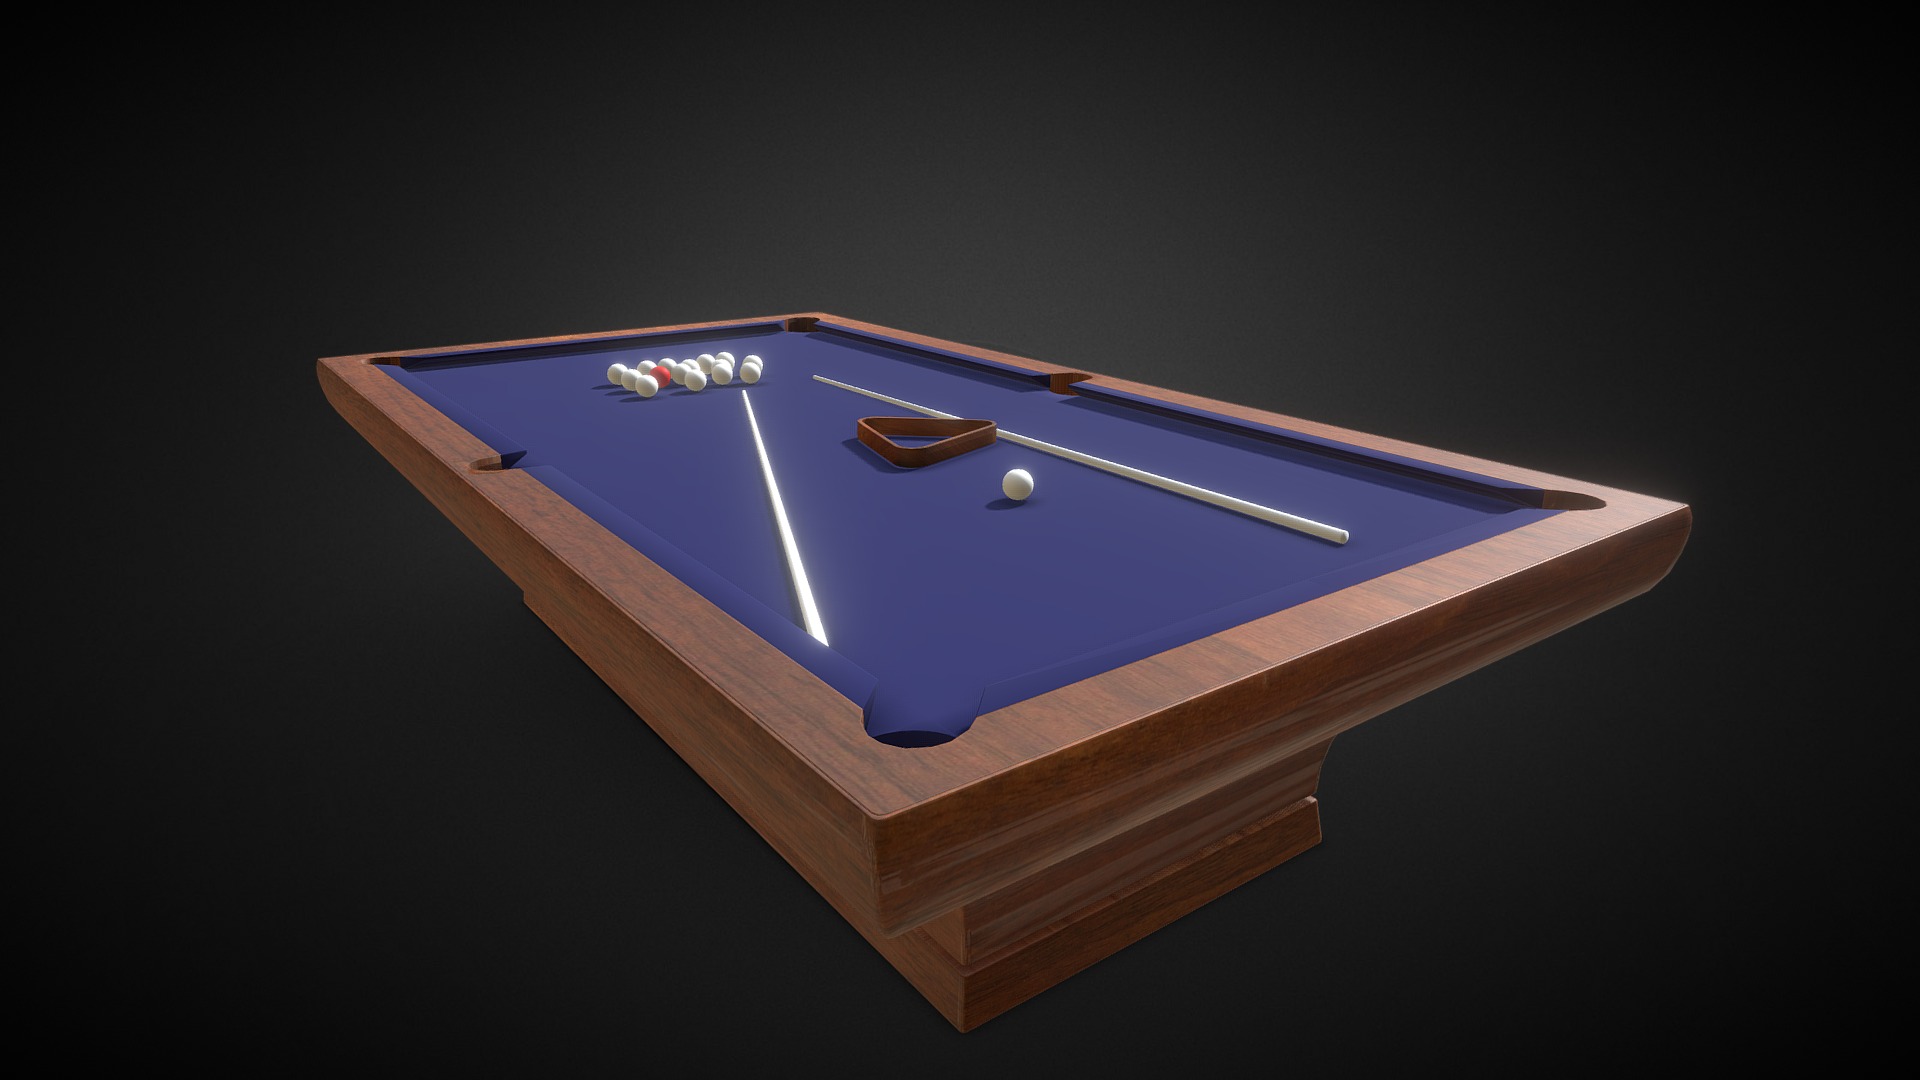 3D model The Billiard Collection, Pool Table Set - This is a 3D model of the The Billiard Collection, Pool Table Set. The 3D model is about a wooden box with a light inside.